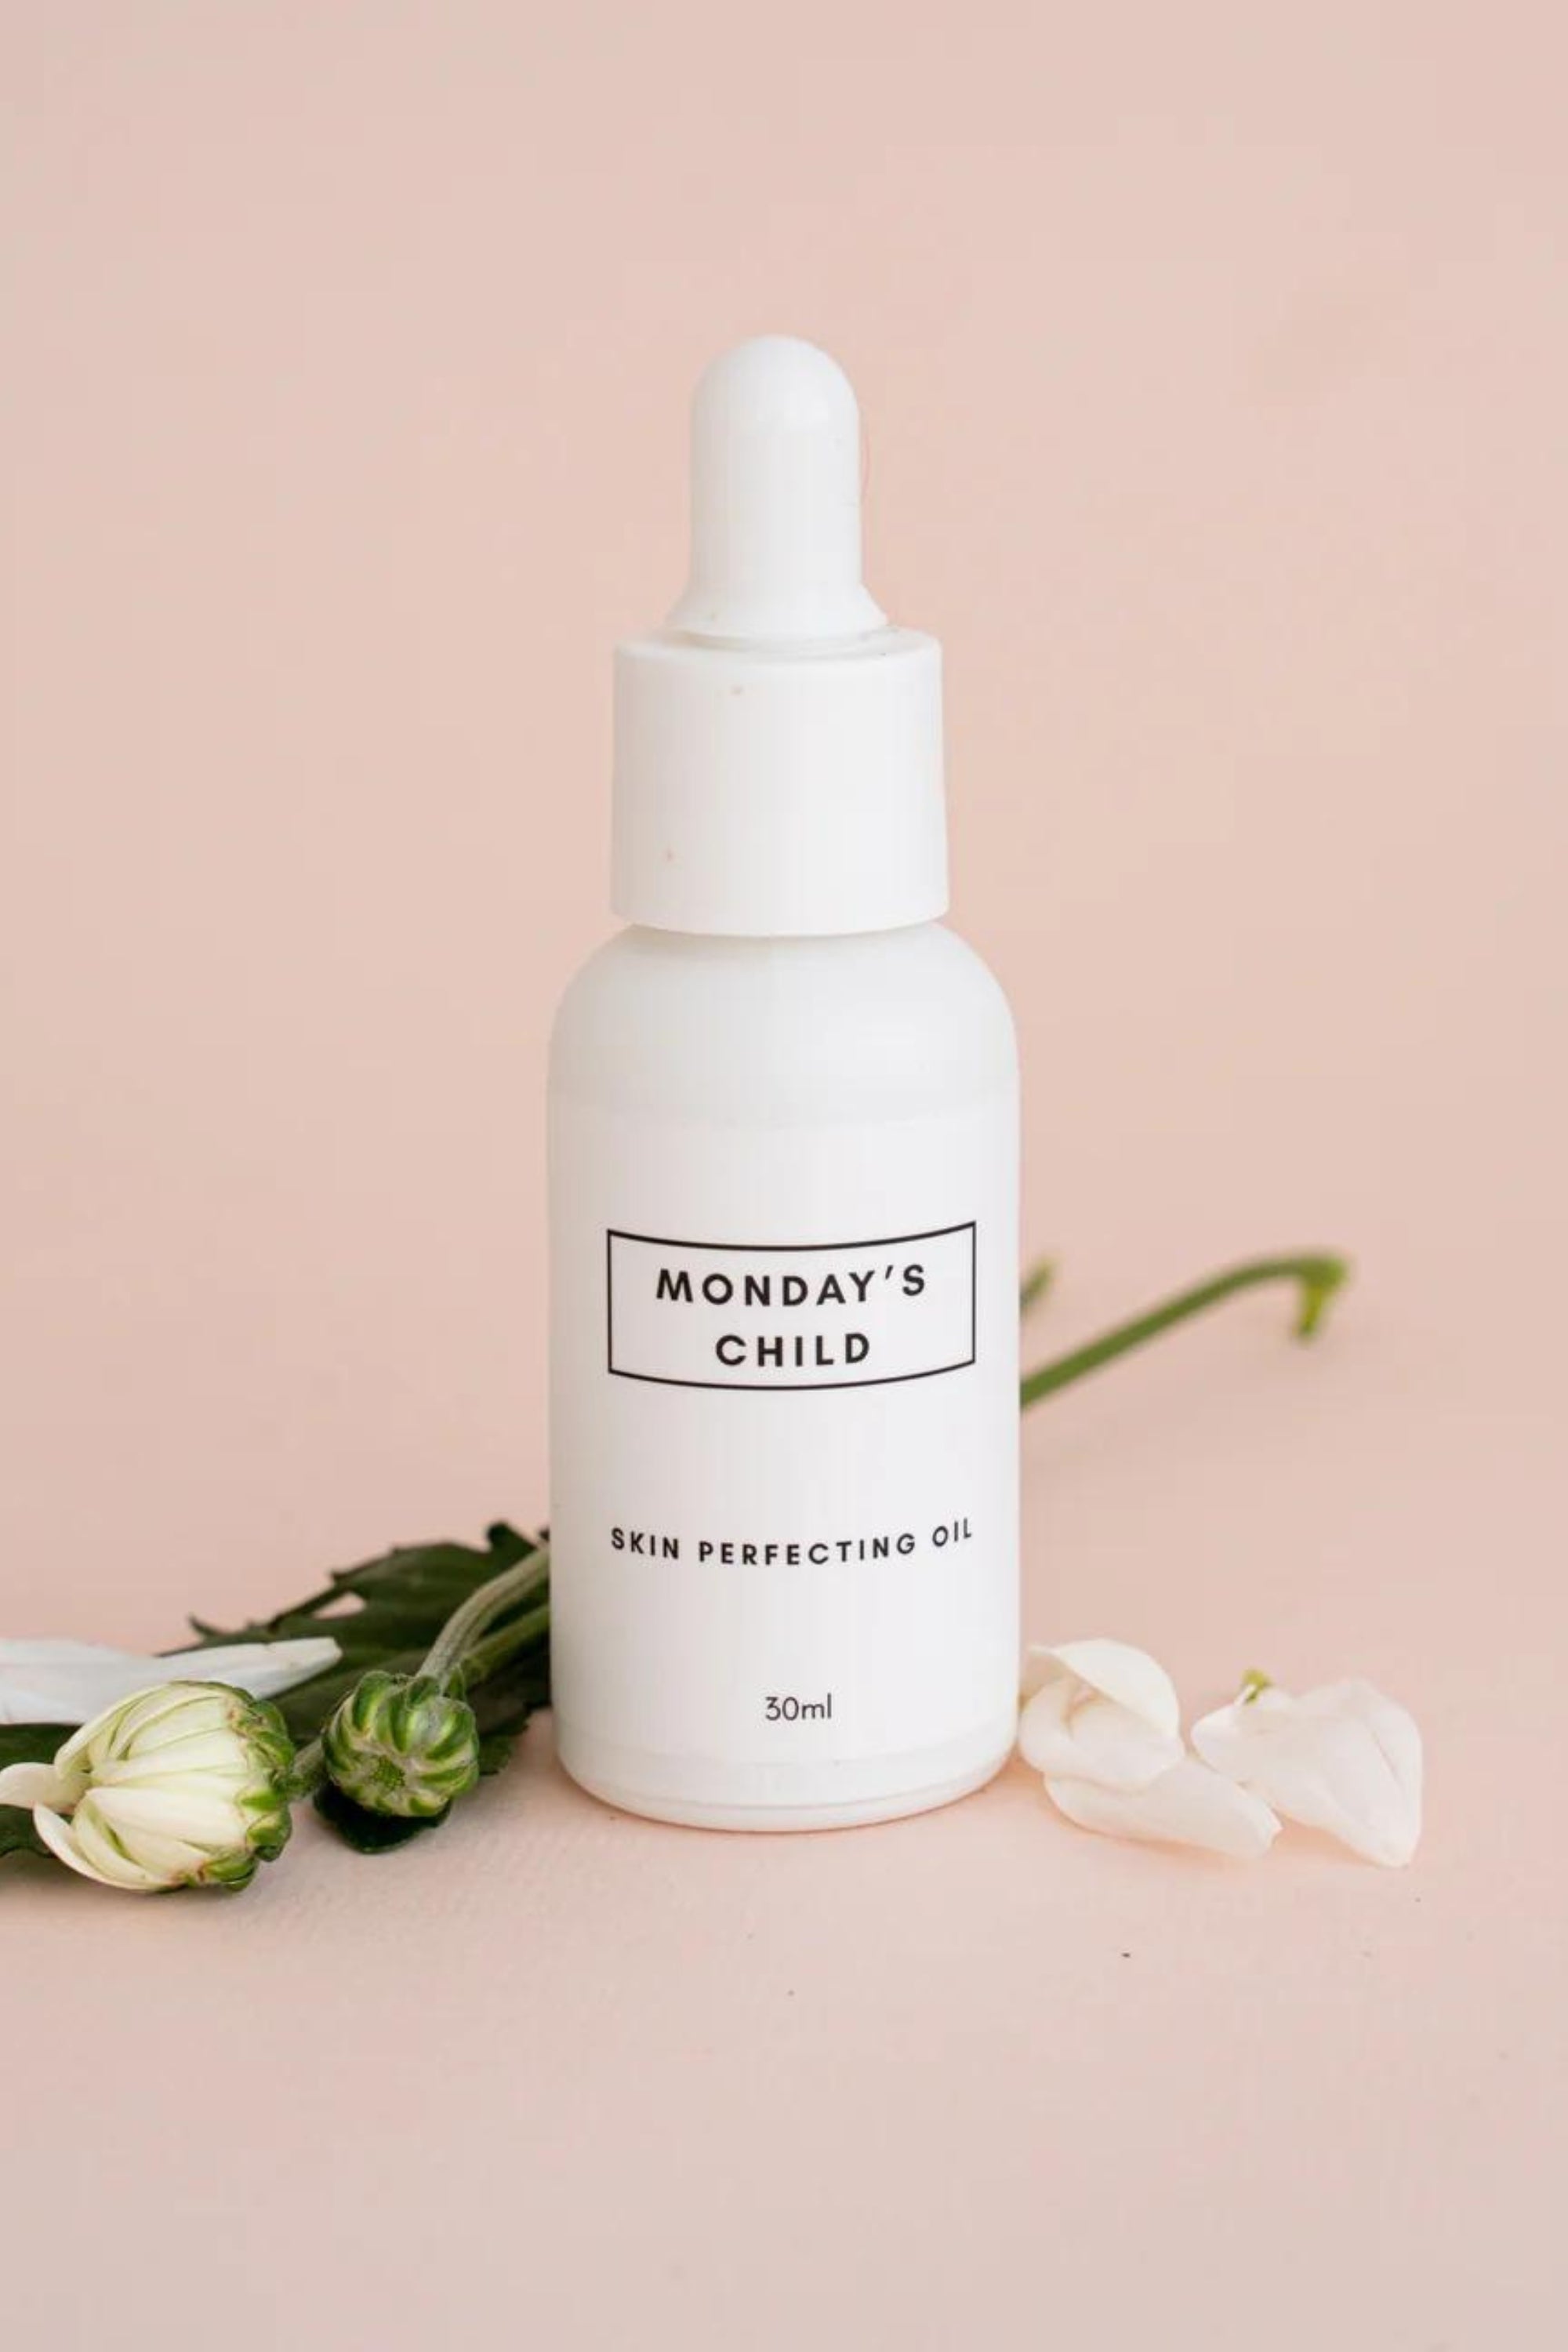 Monday's child skin perfecting oil addressing skin concerns, erases acne scars, marks and redness; helps to control oil production; evens out skin tone; smooths out fine lines; nourishes dryness; gives a boost to dull, tired skin. Sustainable with jojoba, calendula, rosehip, lavender; frankincense and  geranium